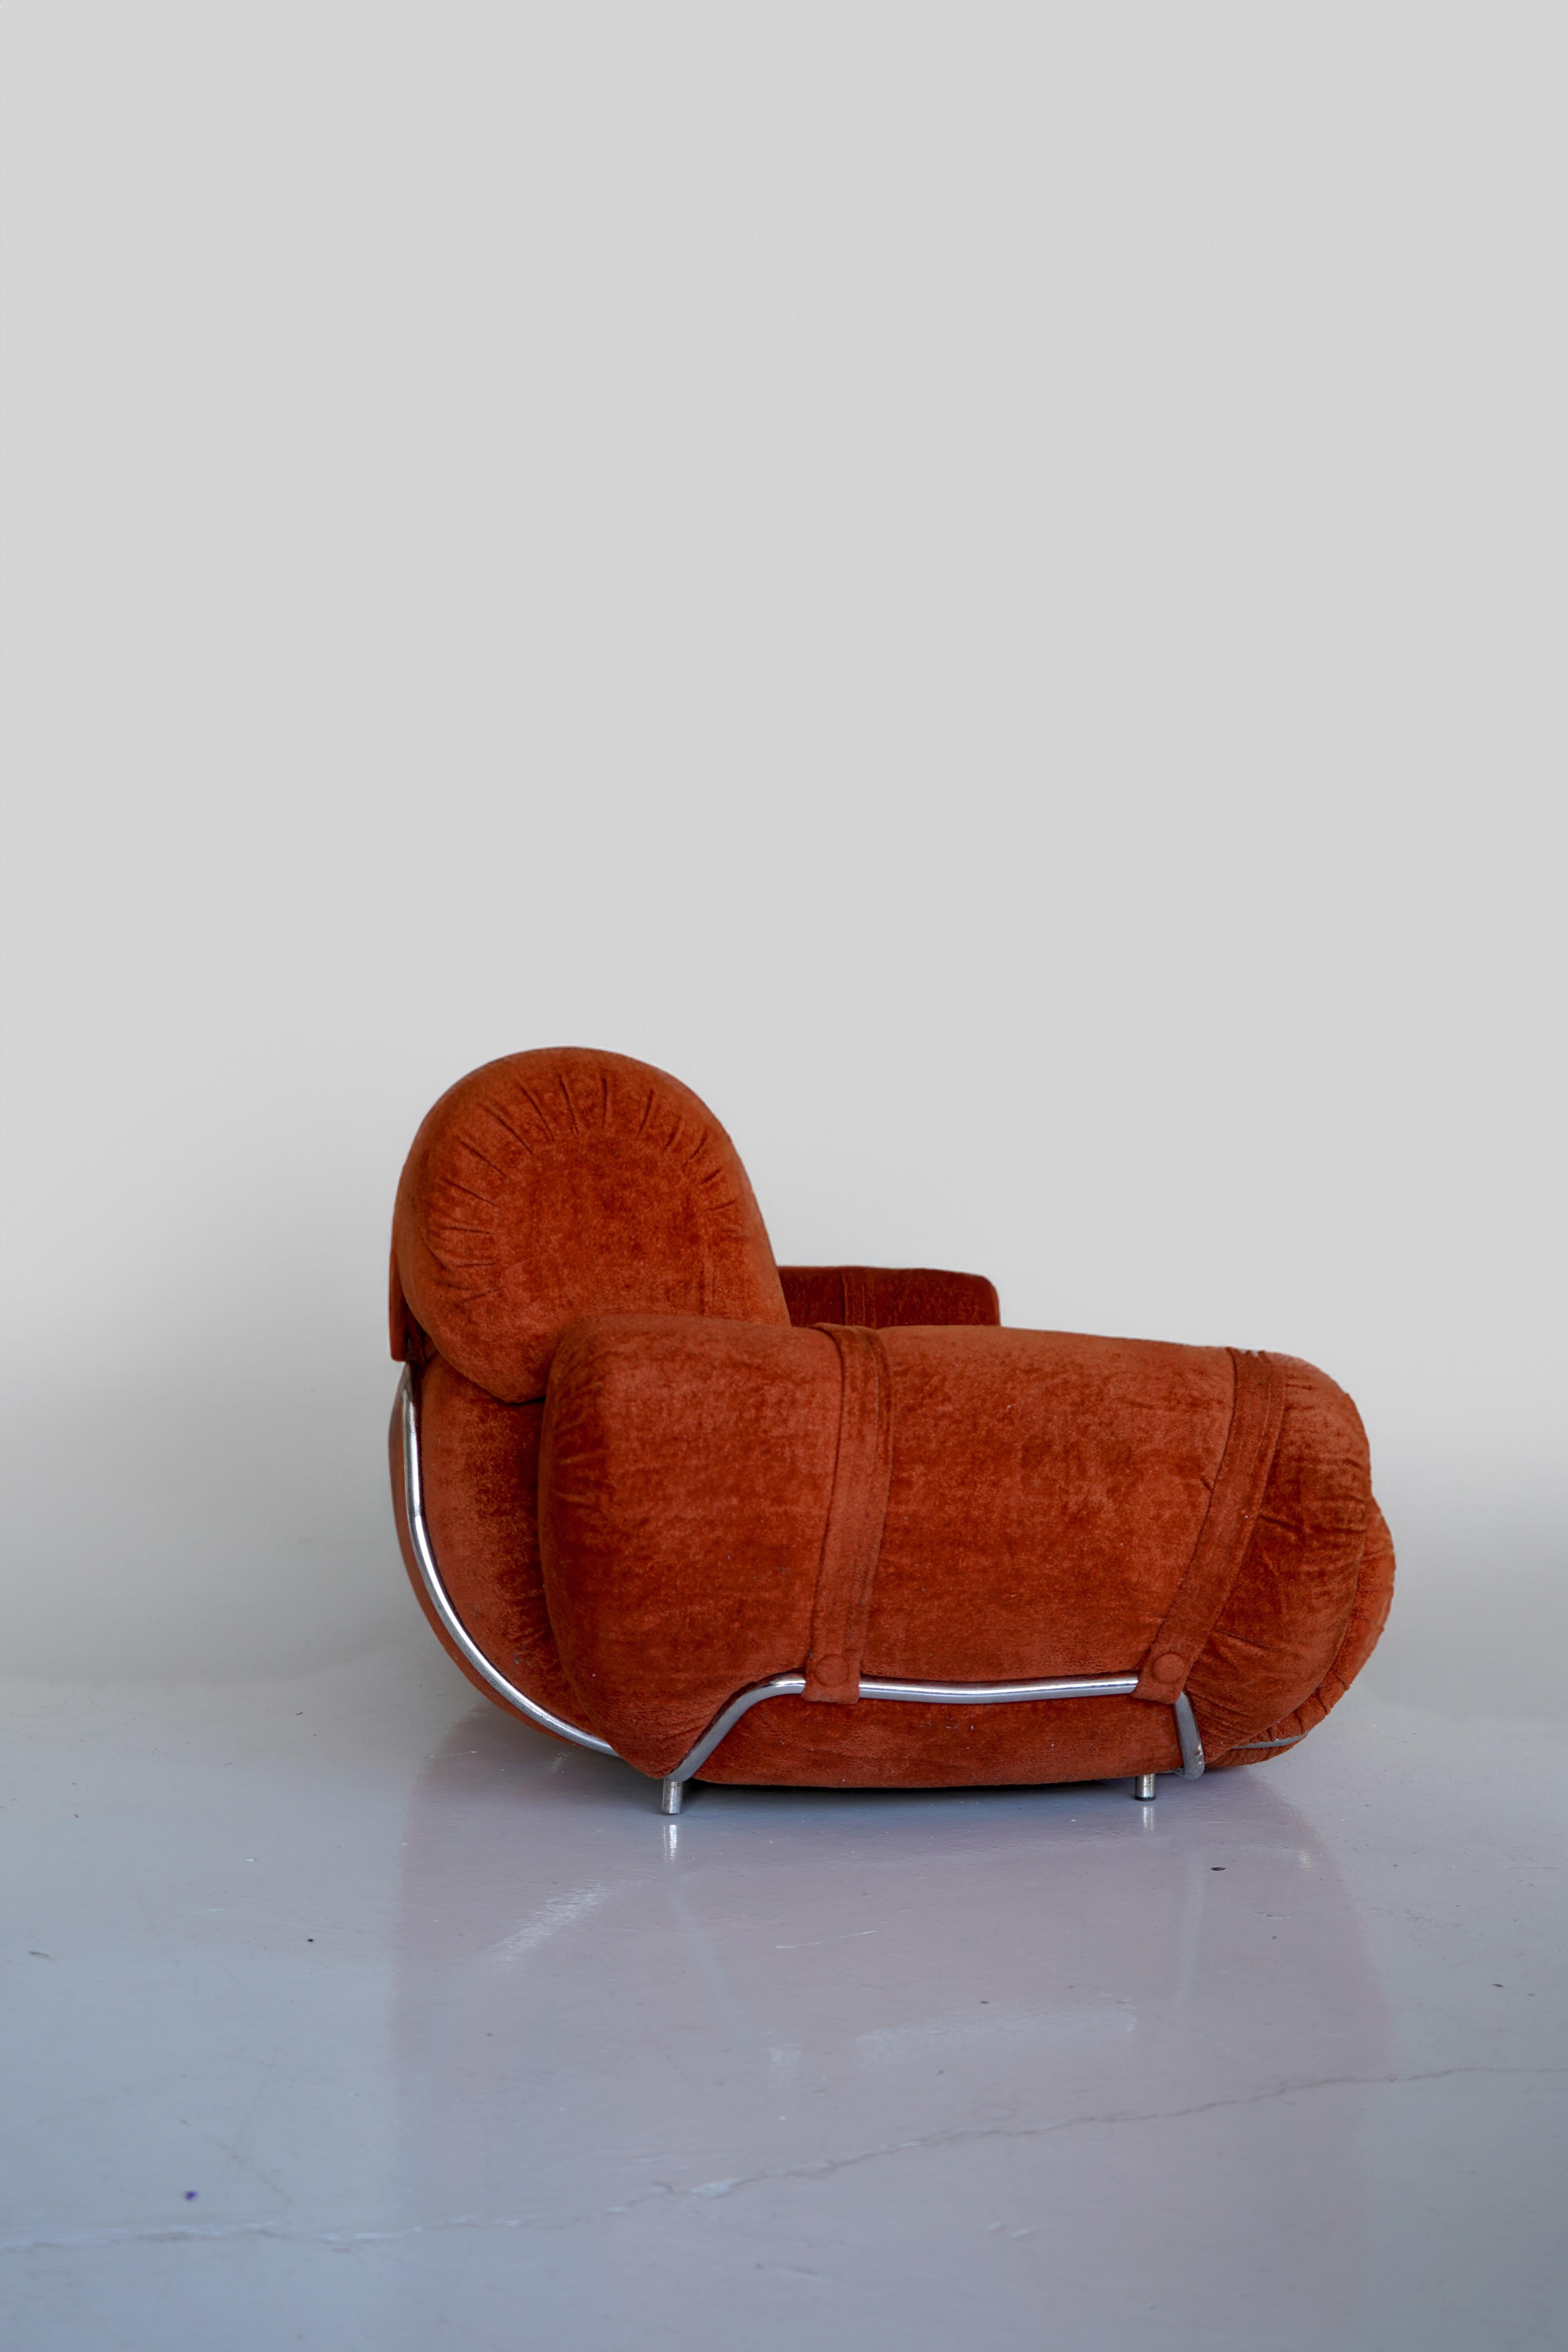 Chubby Italian space age sofa with chrome frame in a vibrant orange velvet. Straps on the arms and backs add a layer of elegance to the exuberant design. Remains in good vintage condition with minor wear.